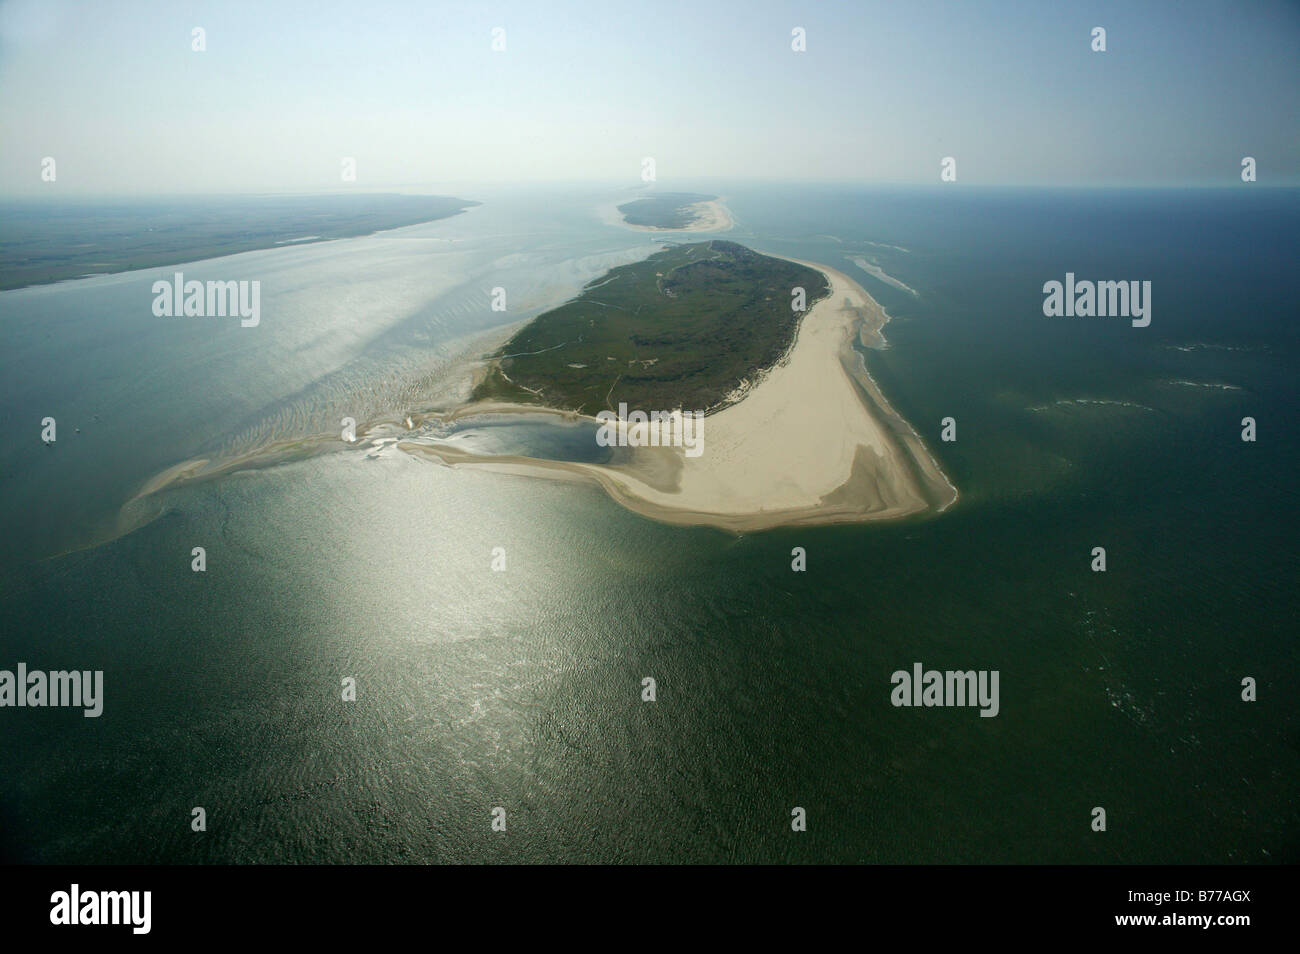 Aerial view, Baltrum Island, North Sea, East Frisian Islands, Lower Saxony, North Germany, Europe Stock Photo